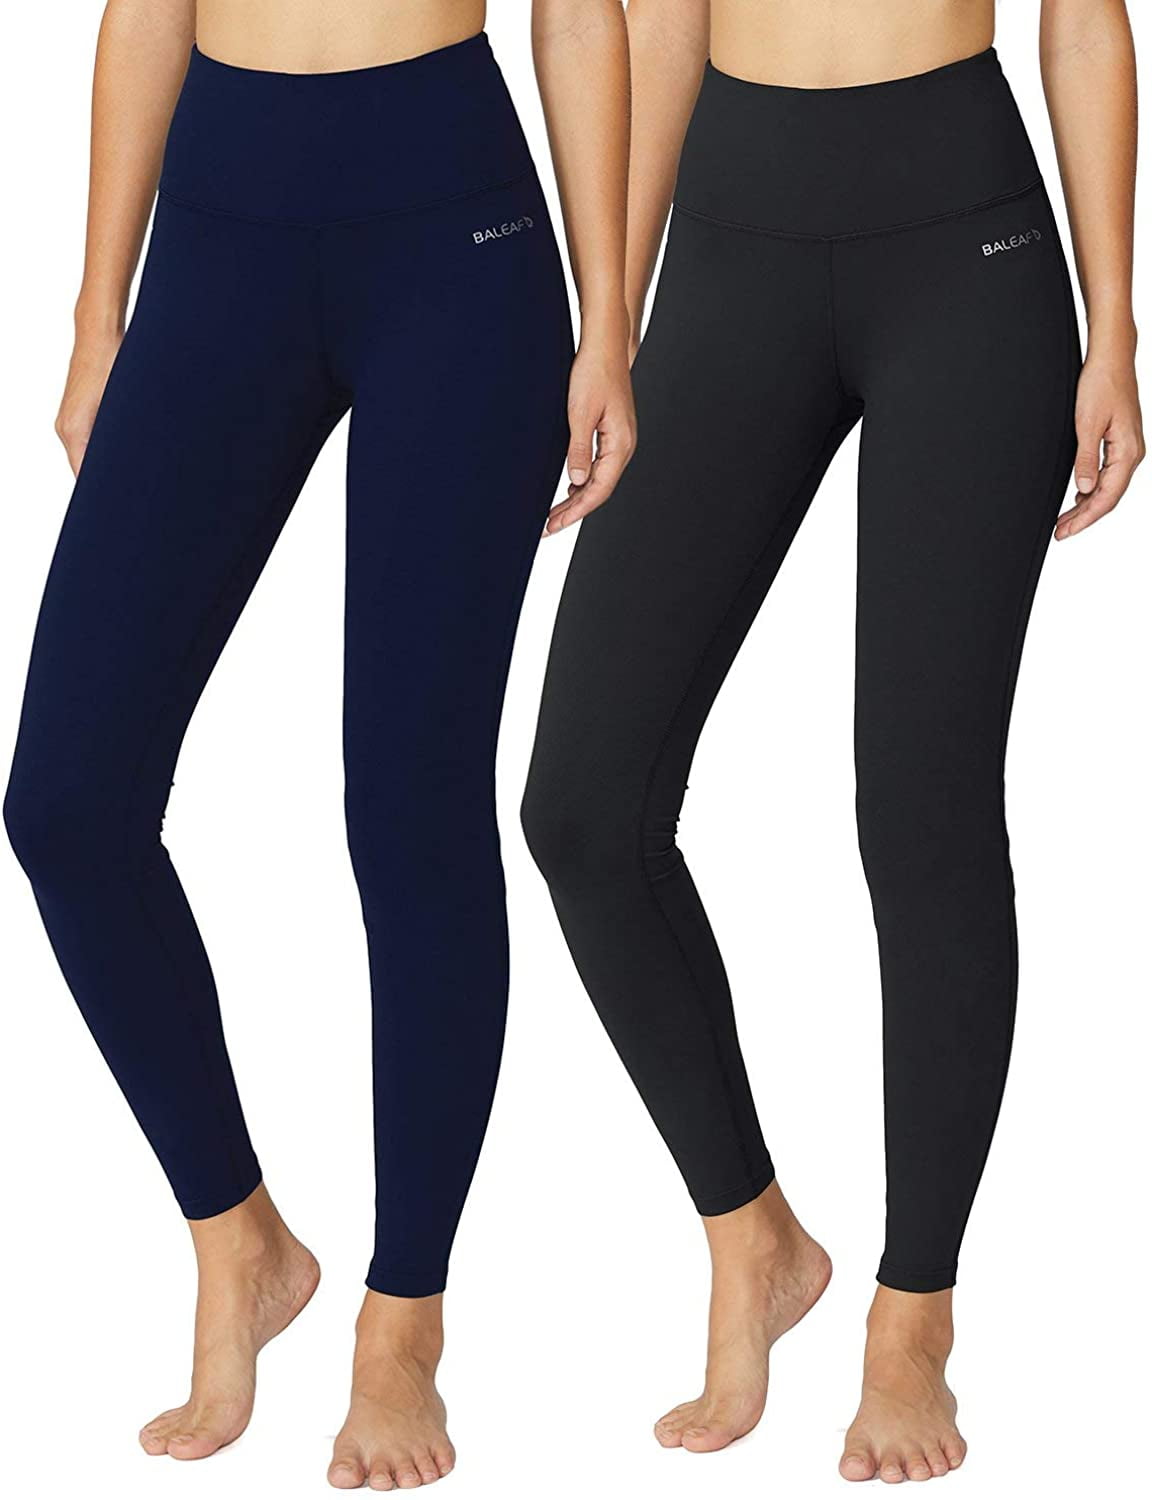 Womens Ankle Legging Yoga Pants with Pocket Non See-Through Fabric